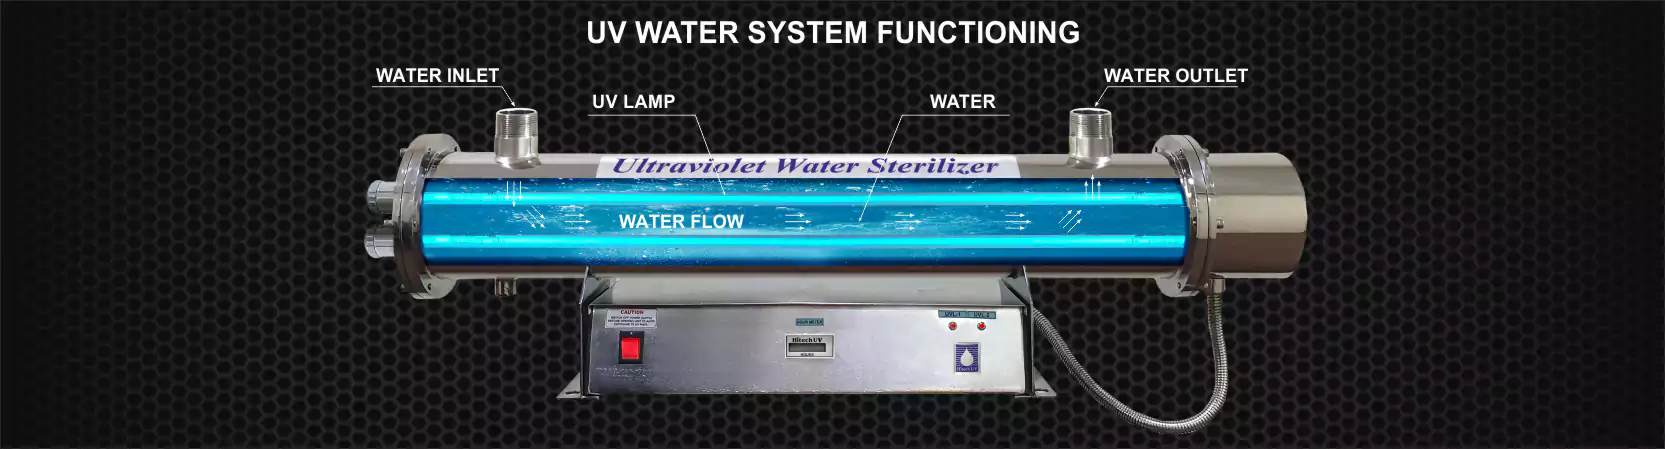 UV Water Disinfaction System Functioning